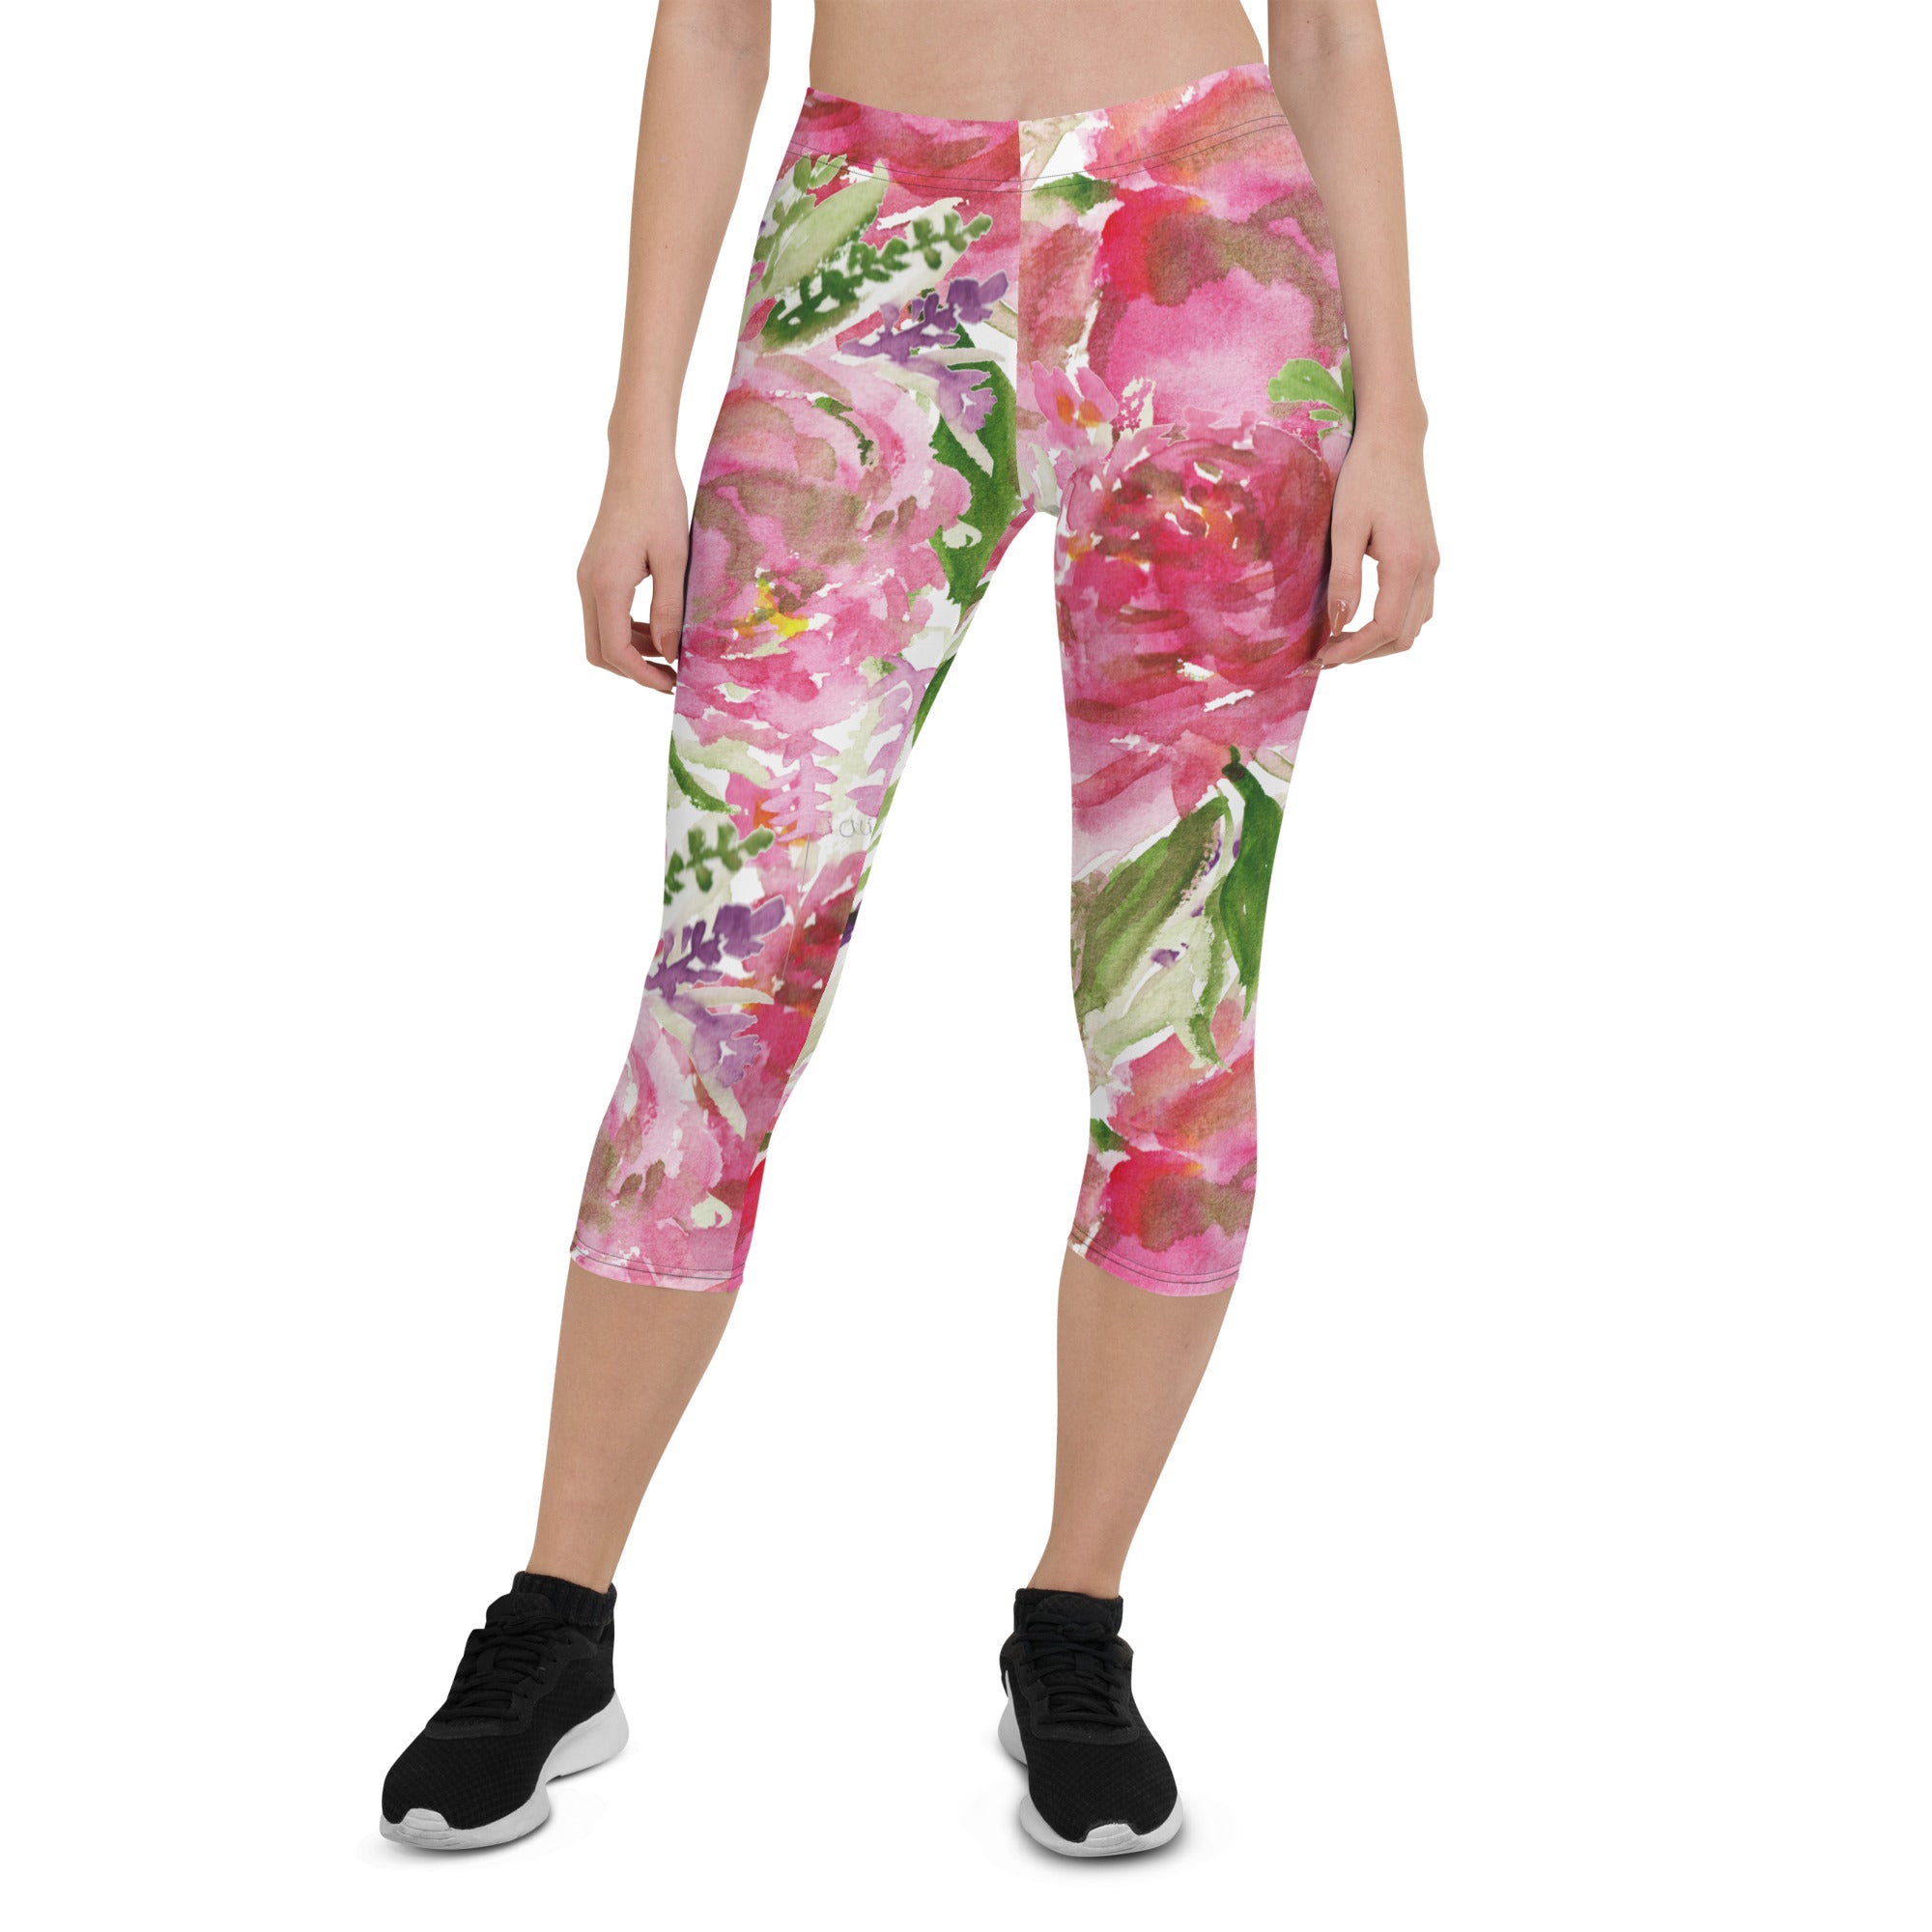 Pink Rose Women's Capri Leggings, Floral Casual Tights Floral Designer  Casual 38–40 UPF Capri Leggings Activewear Outfit - Made in USA/EU/MX (US  Size: XS-XL)